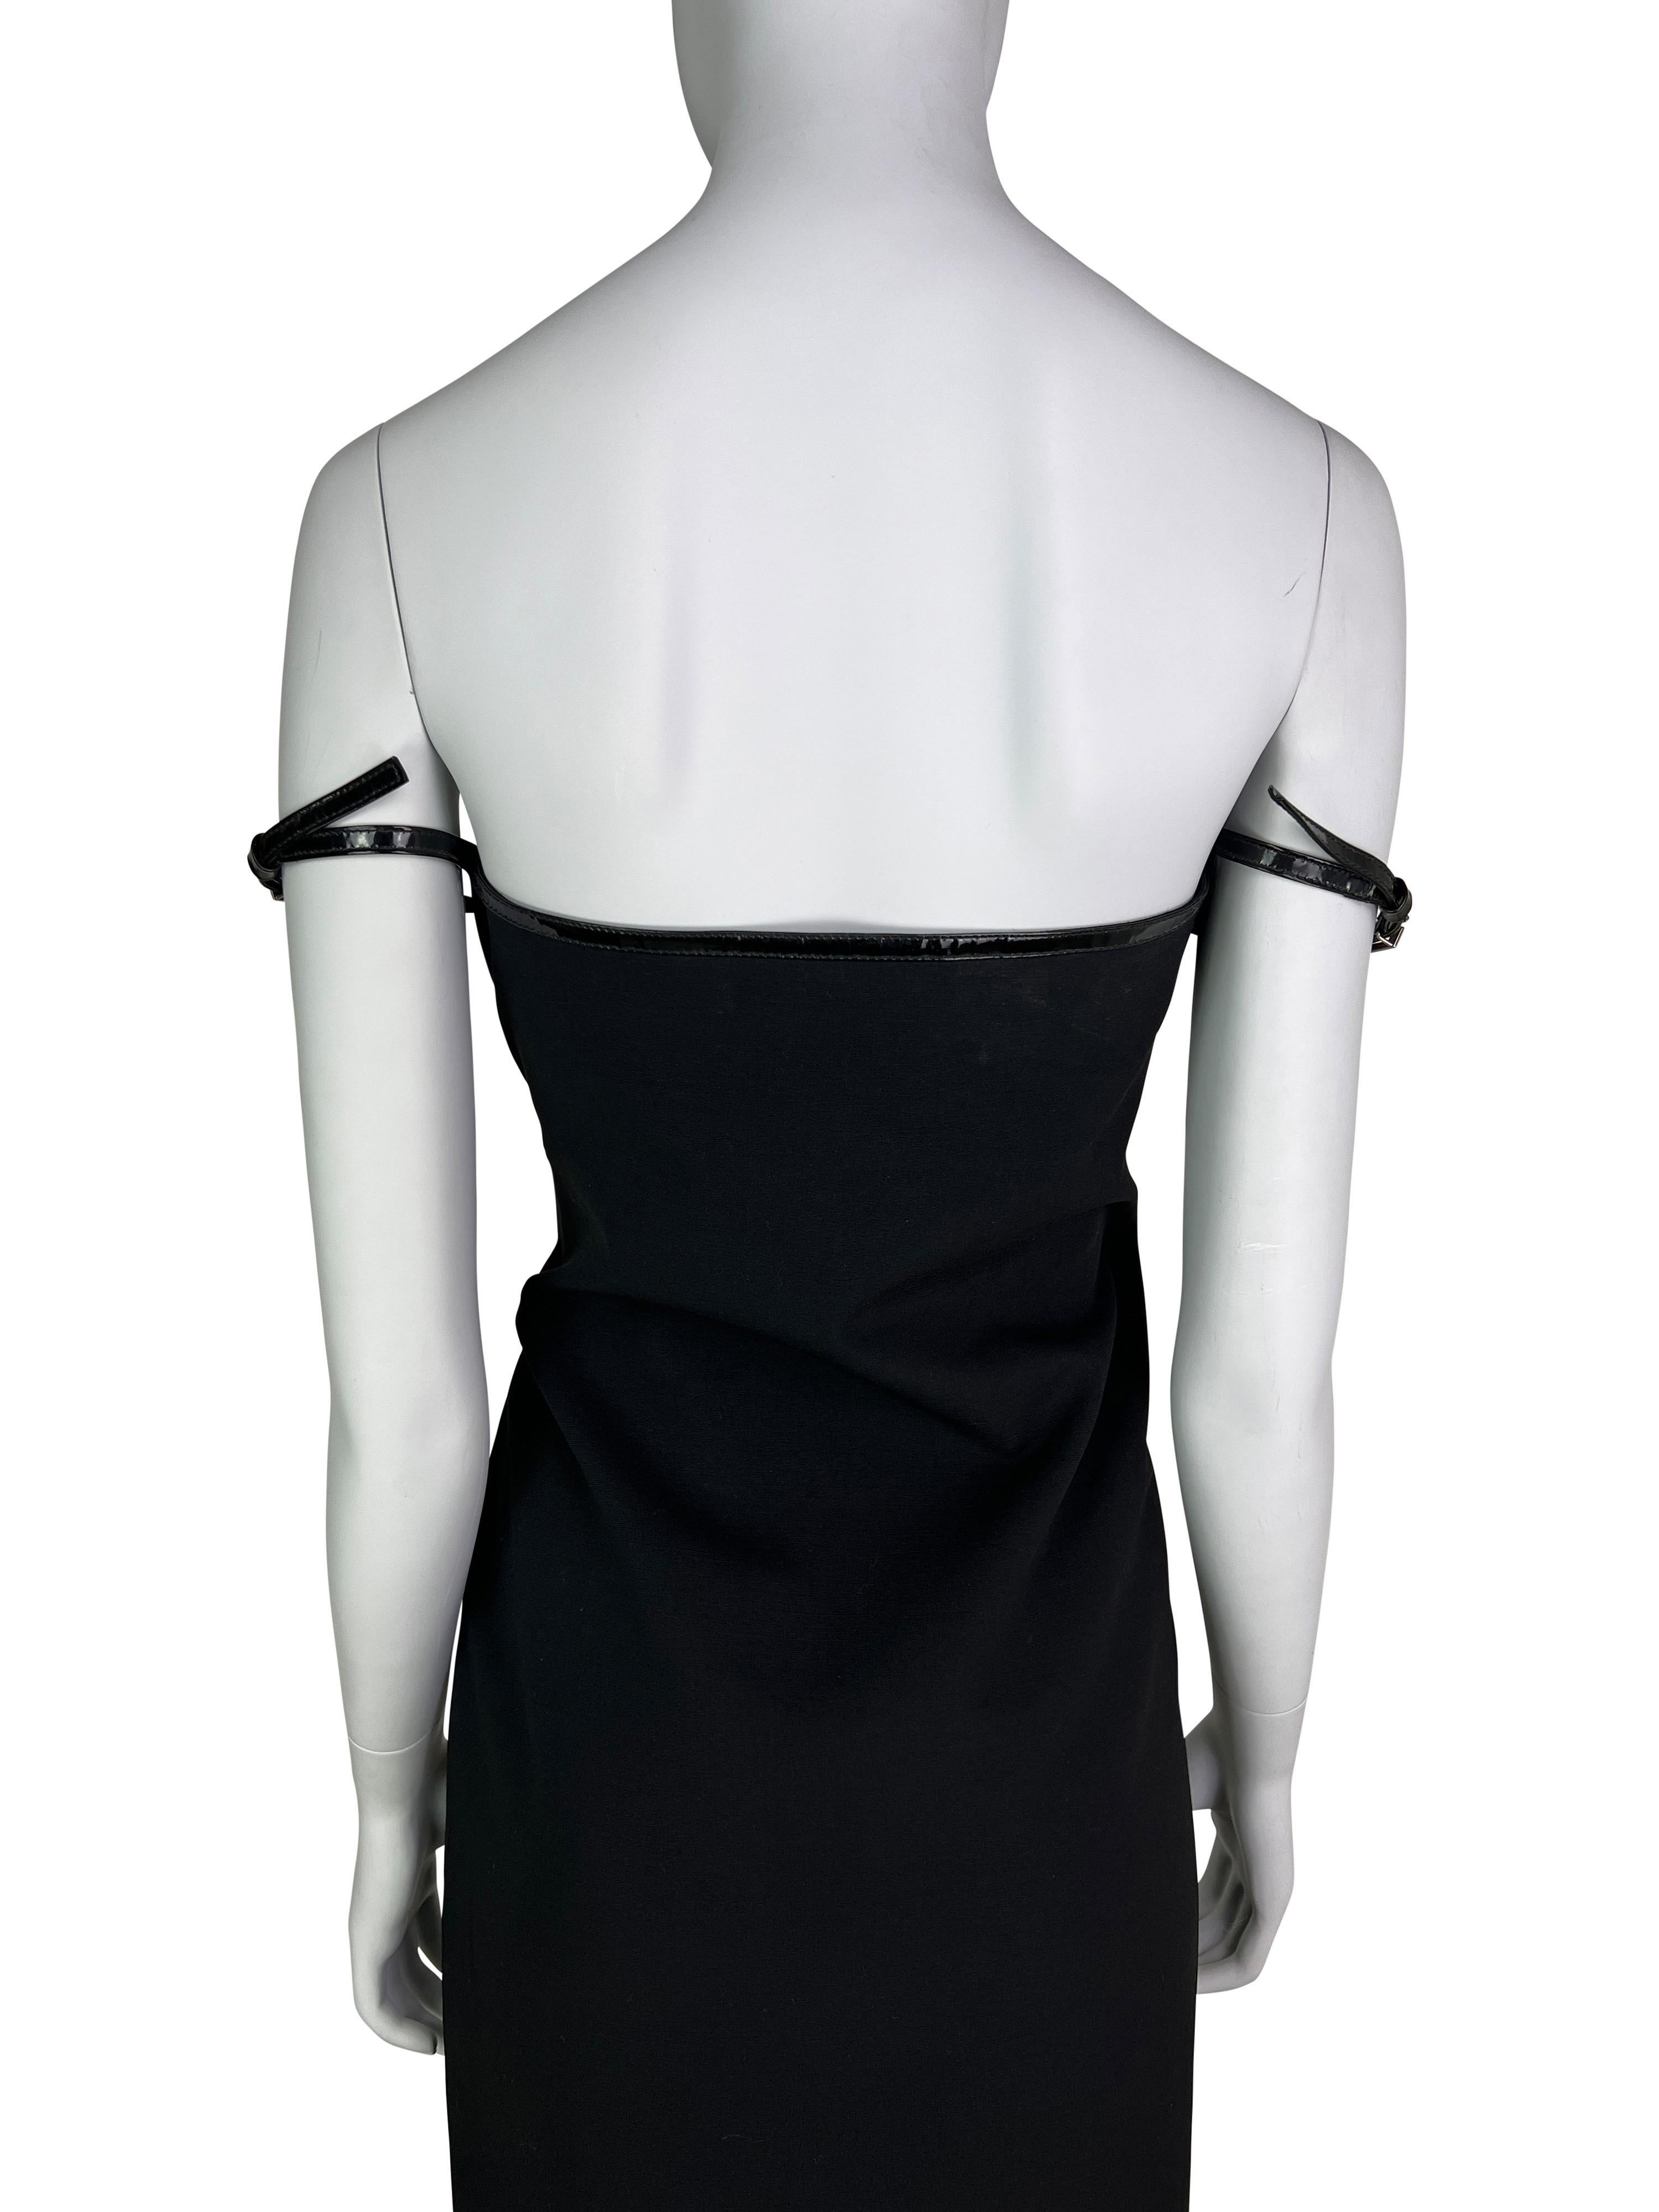 Gucci by Tom Ford Fall 1997 G-logo Strap Evening Black Dress For Sale 4